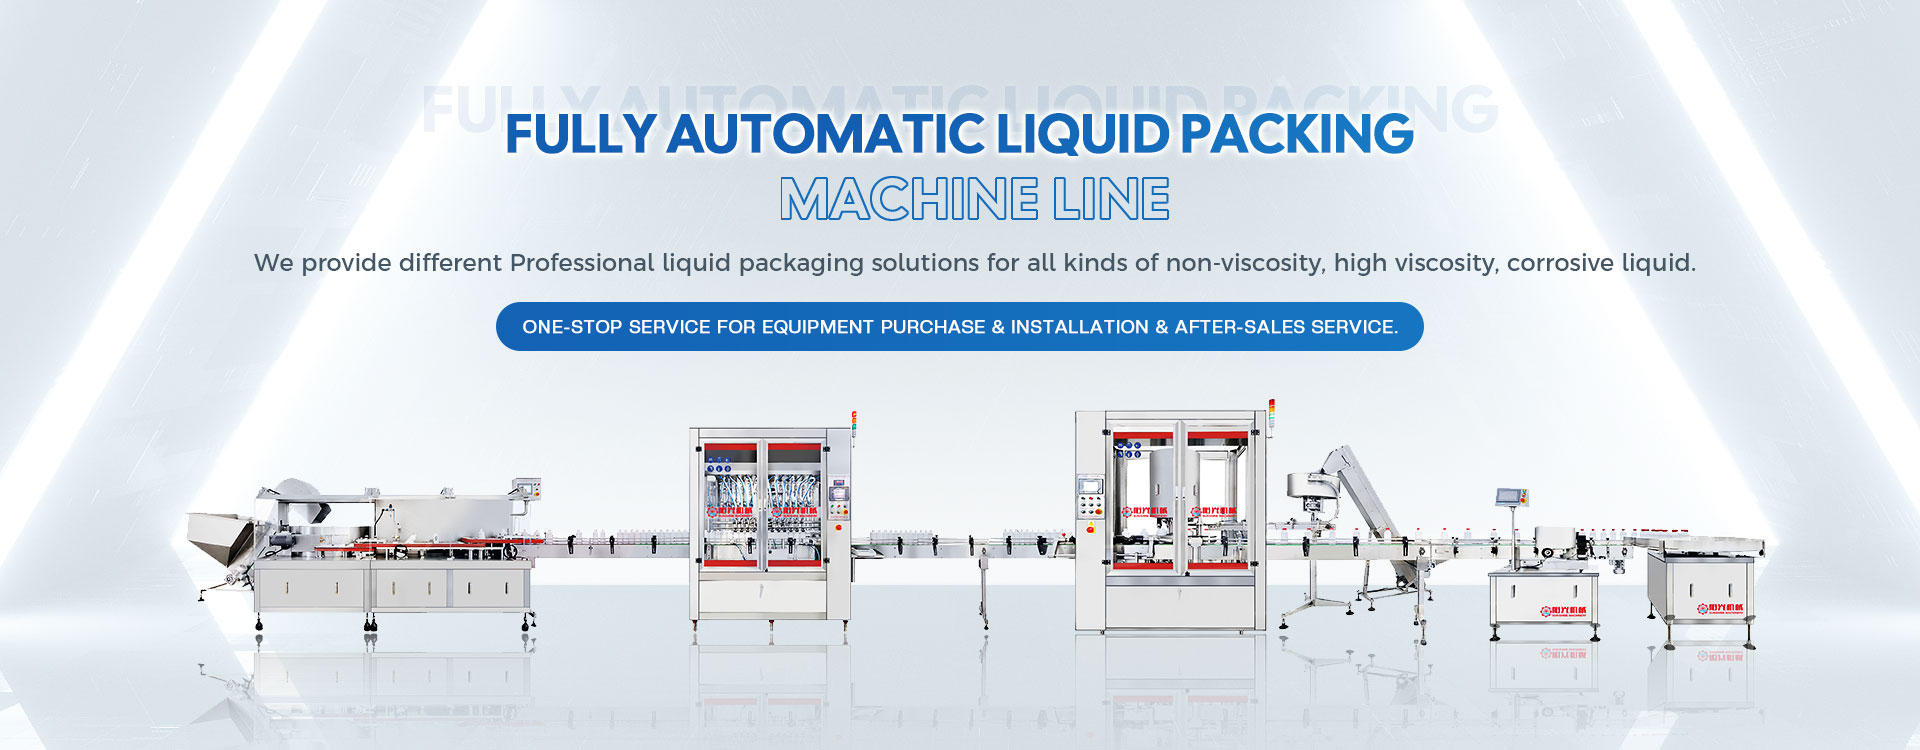 Fully automatic liquid packing machine line